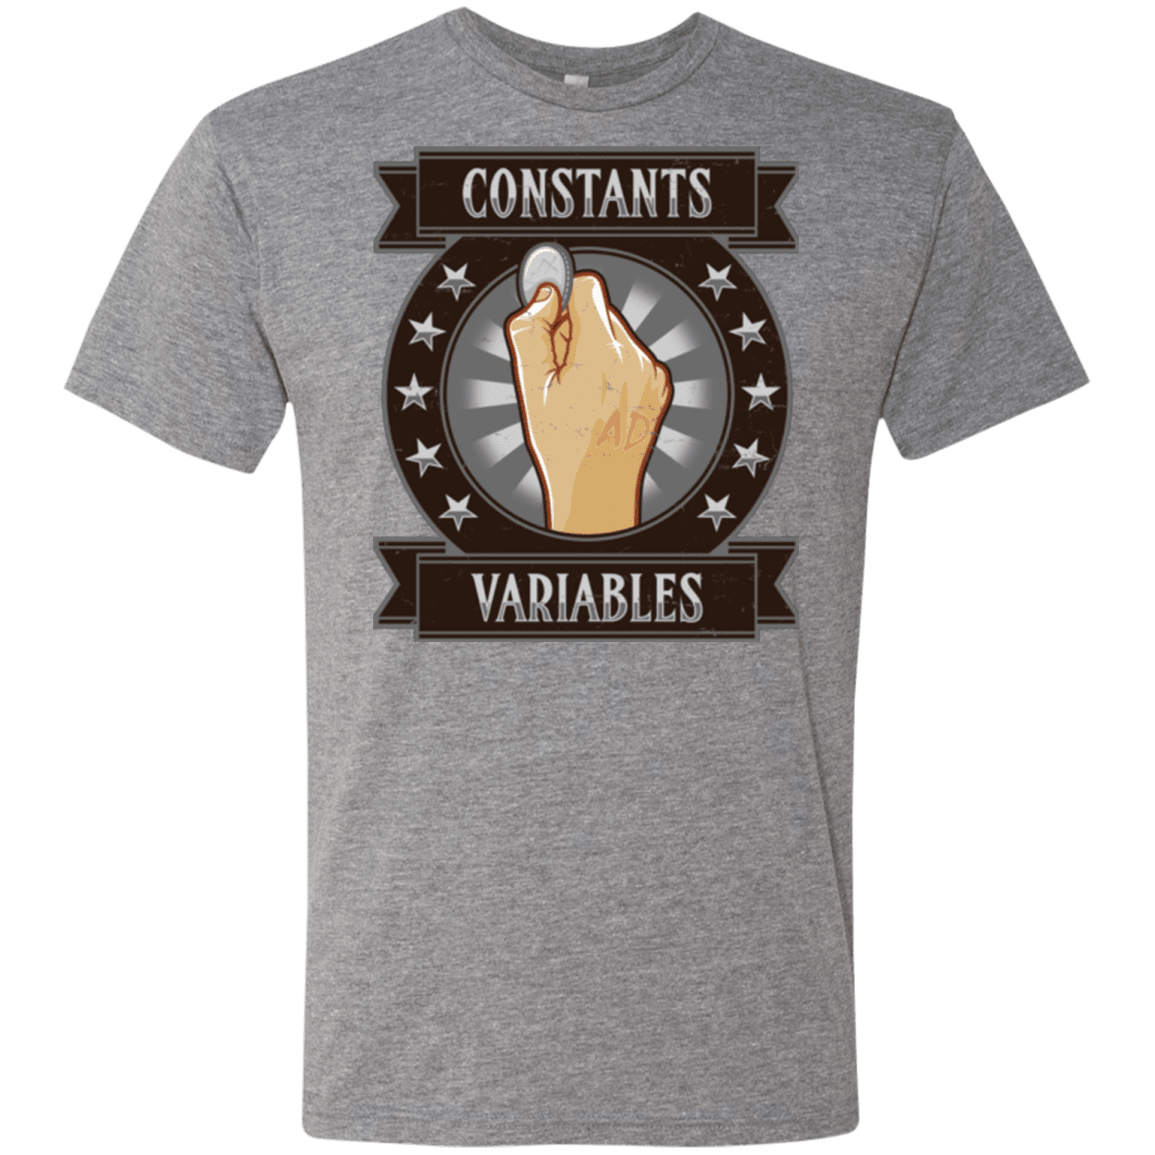 T-Shirts Premium Heather / Small CONSTANTS AND VARIABLES Men's Triblend T-Shirt